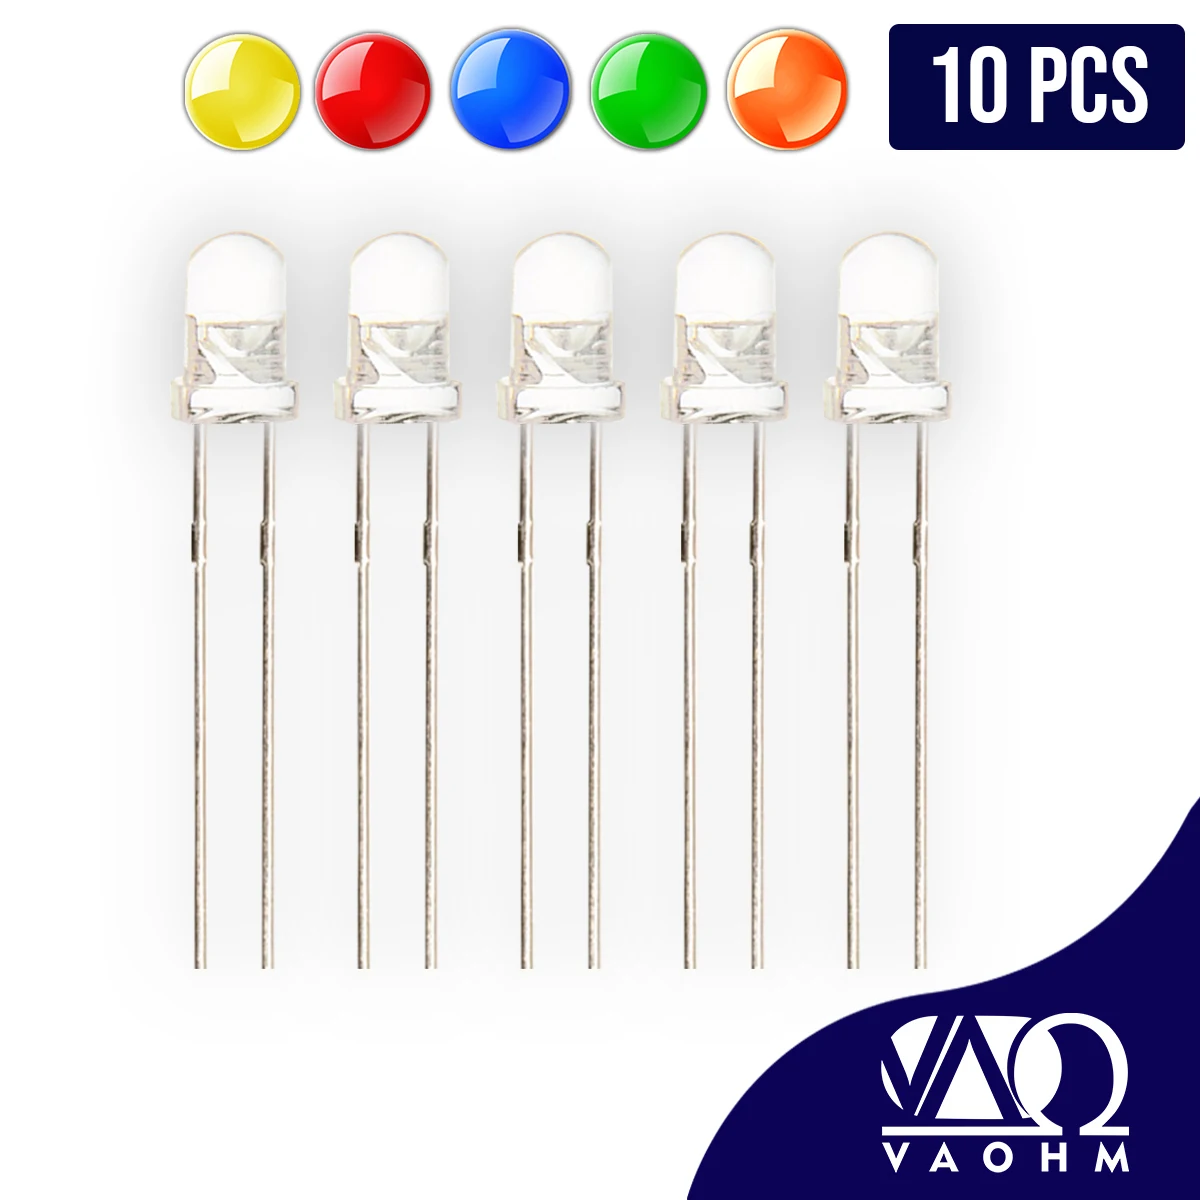 

10 PCS/LOT LED 3mm Water Clear F3 Super Bright Light Emitting Diode Green Red White Yellow Blue Orange